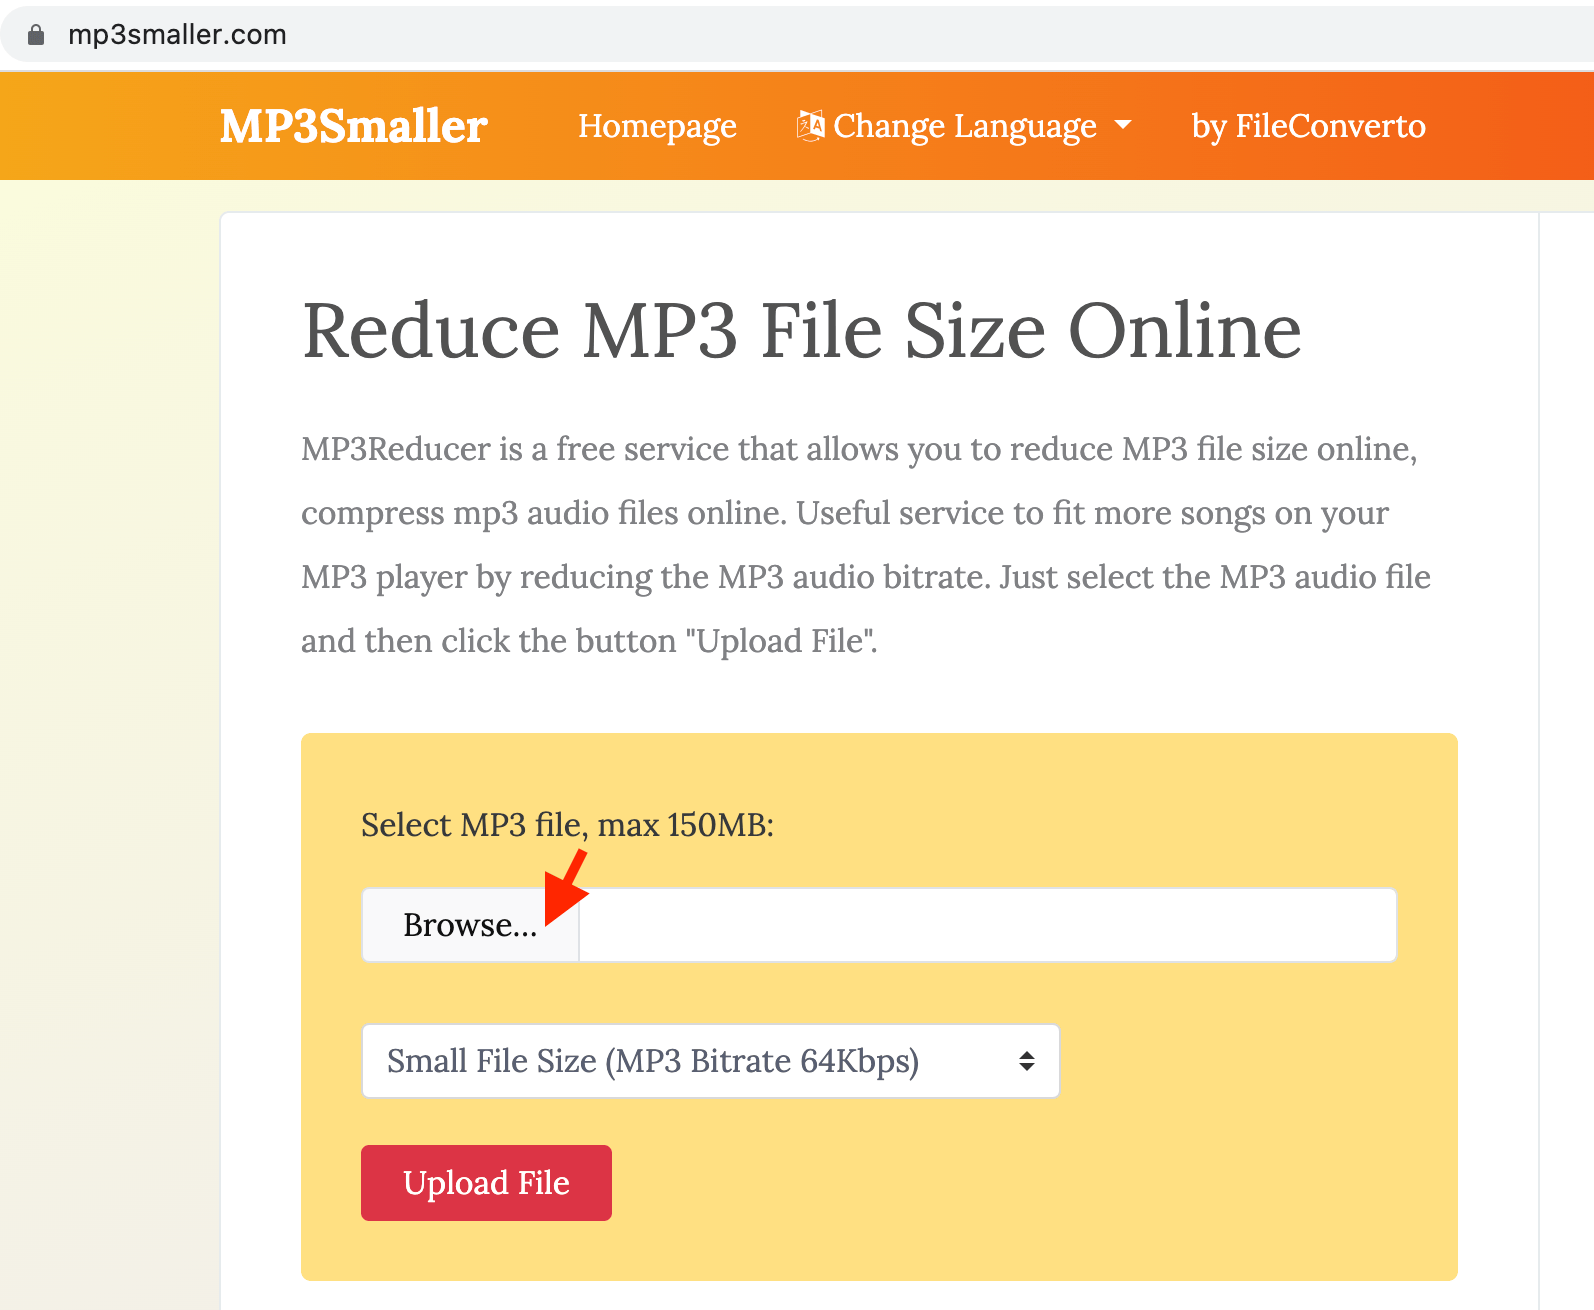 How To Reduce MP3 Size using mp3smaller: Step 1